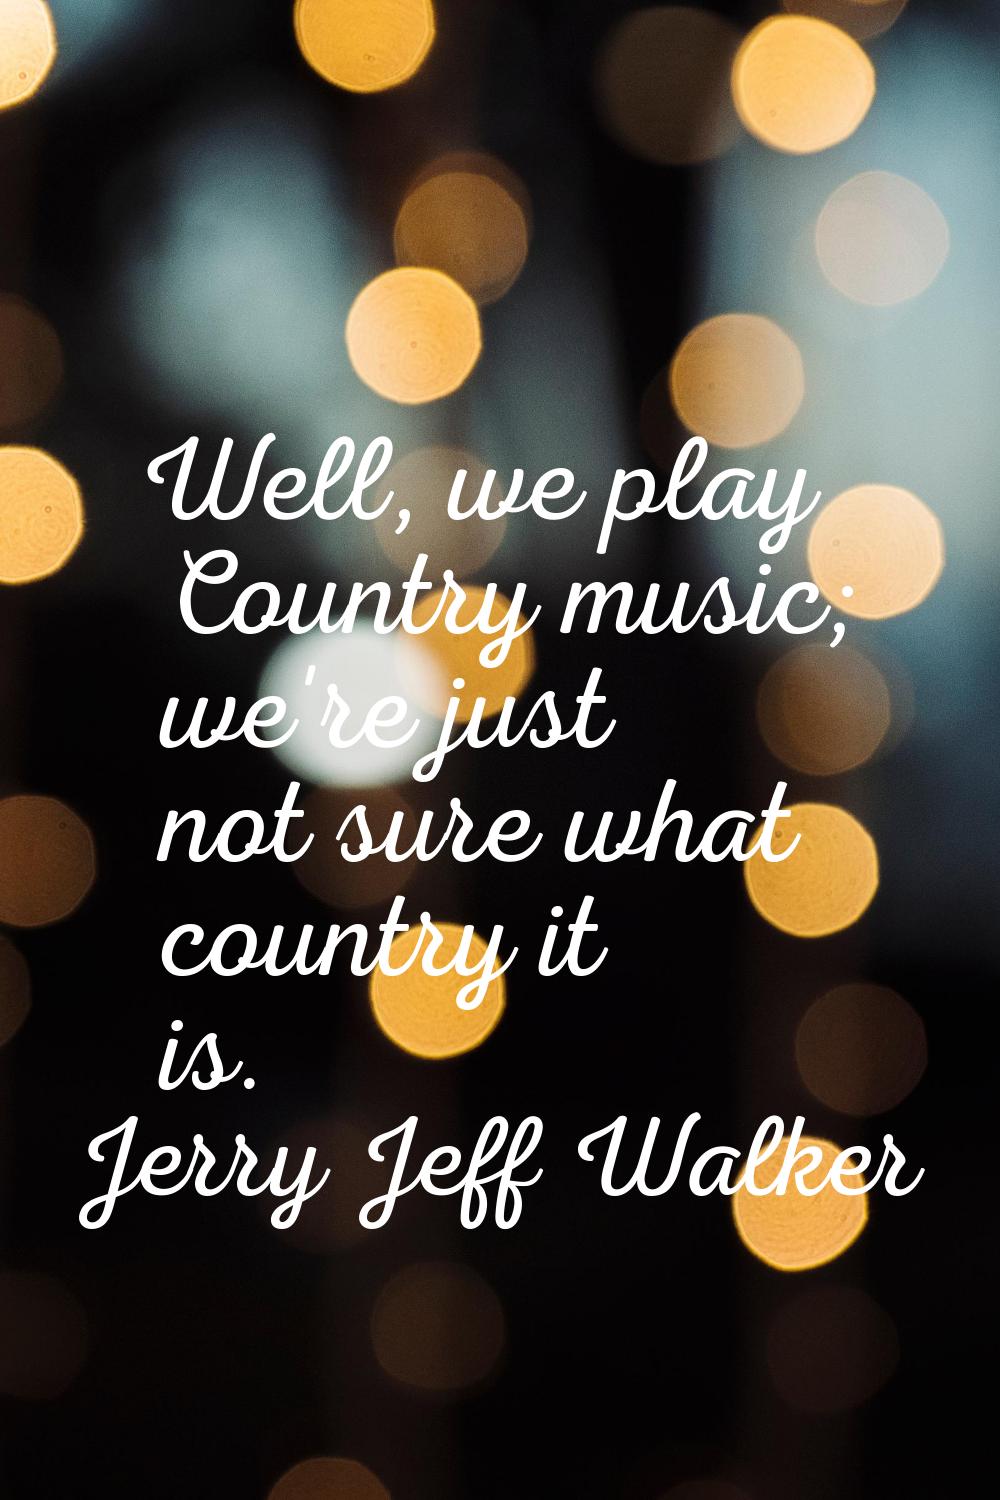 Well, we play Country music; we're just not sure what country it is.